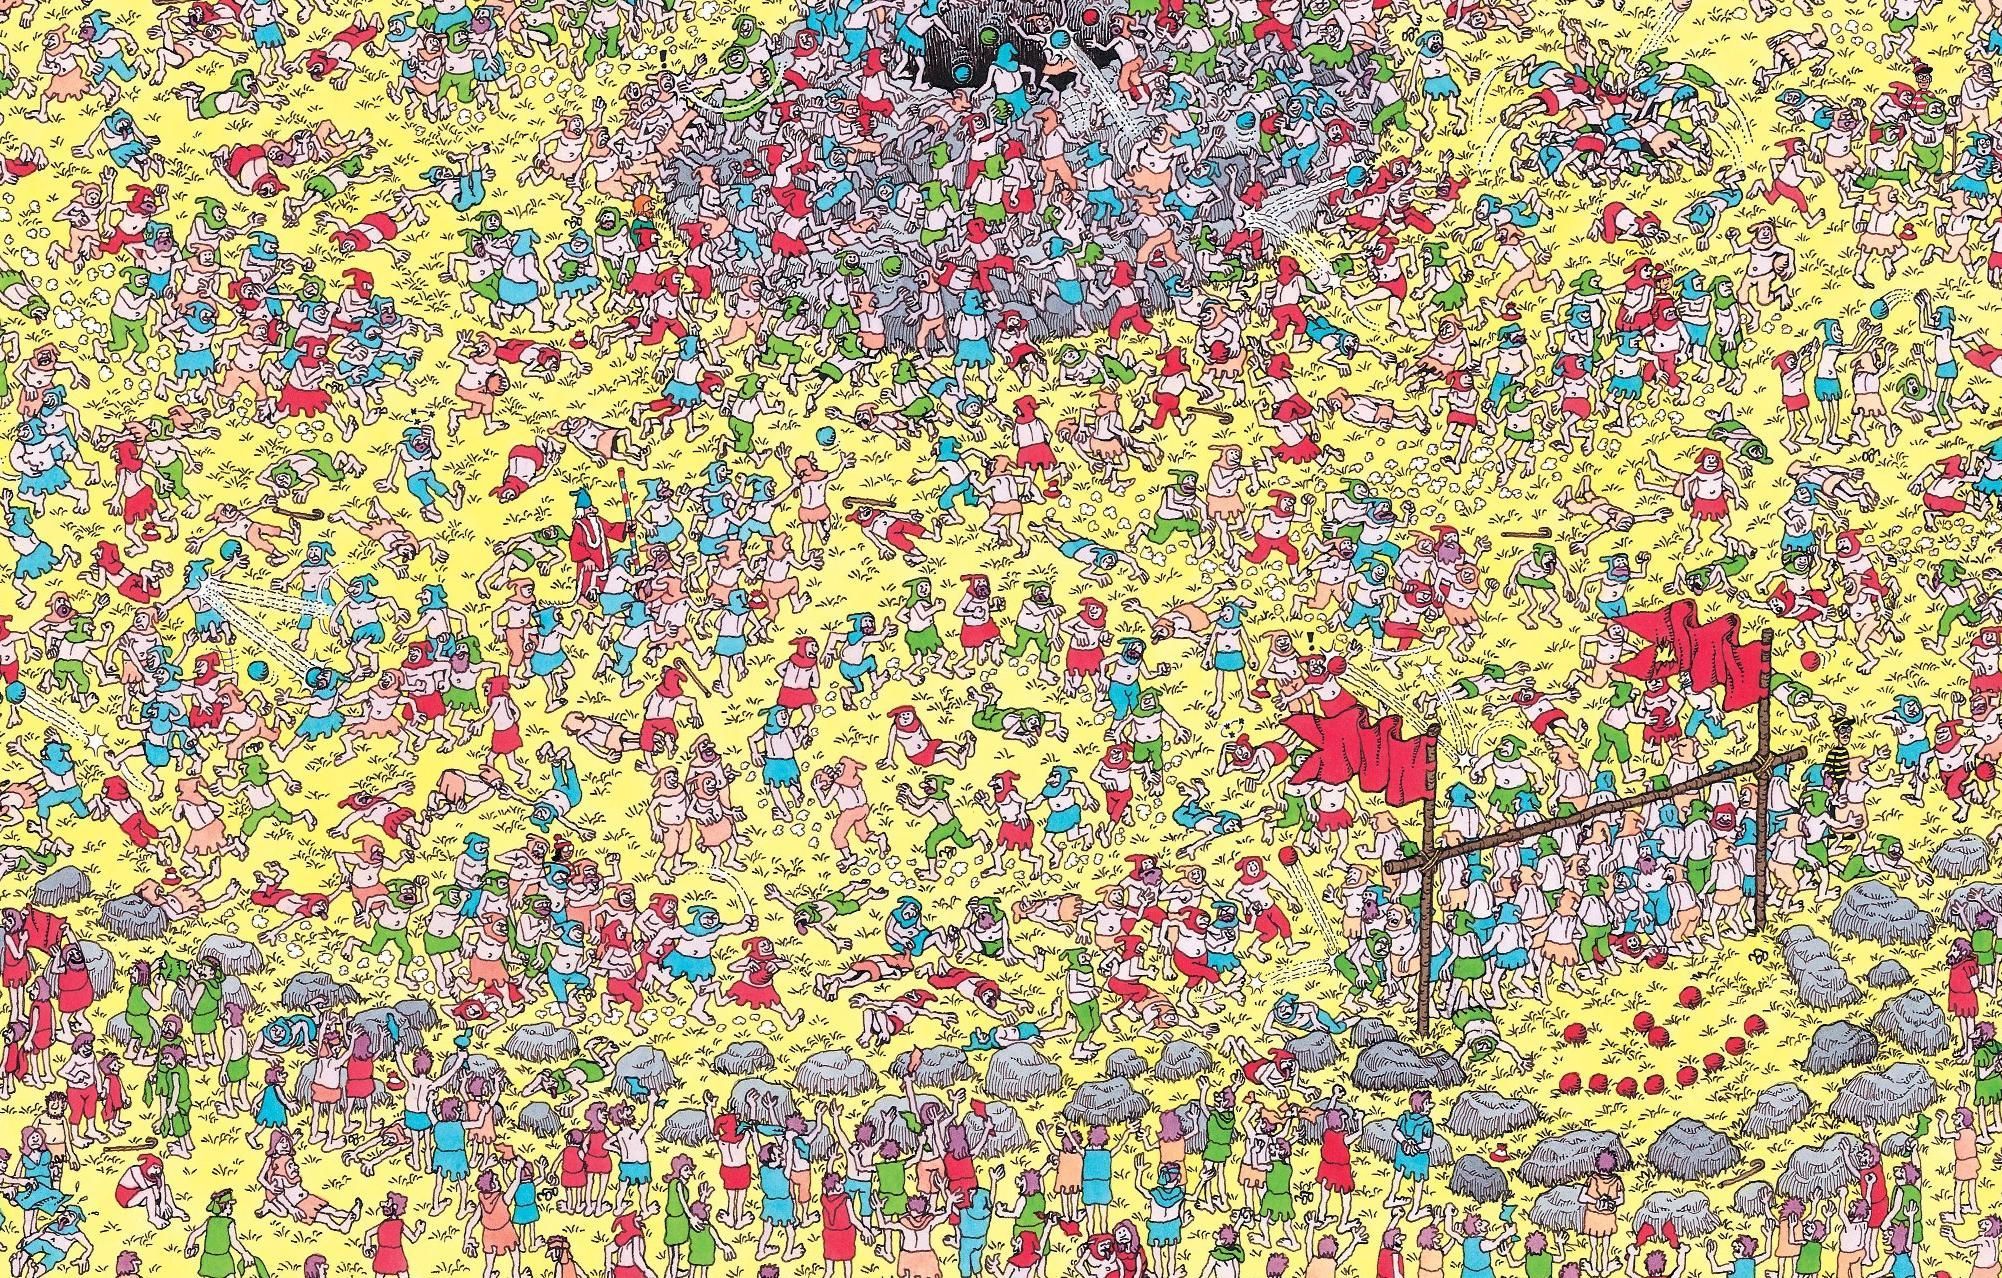 You can go ahead and cancel your plans for the weekend. Wheres wally, Where's waldo picture, Wheres waldo